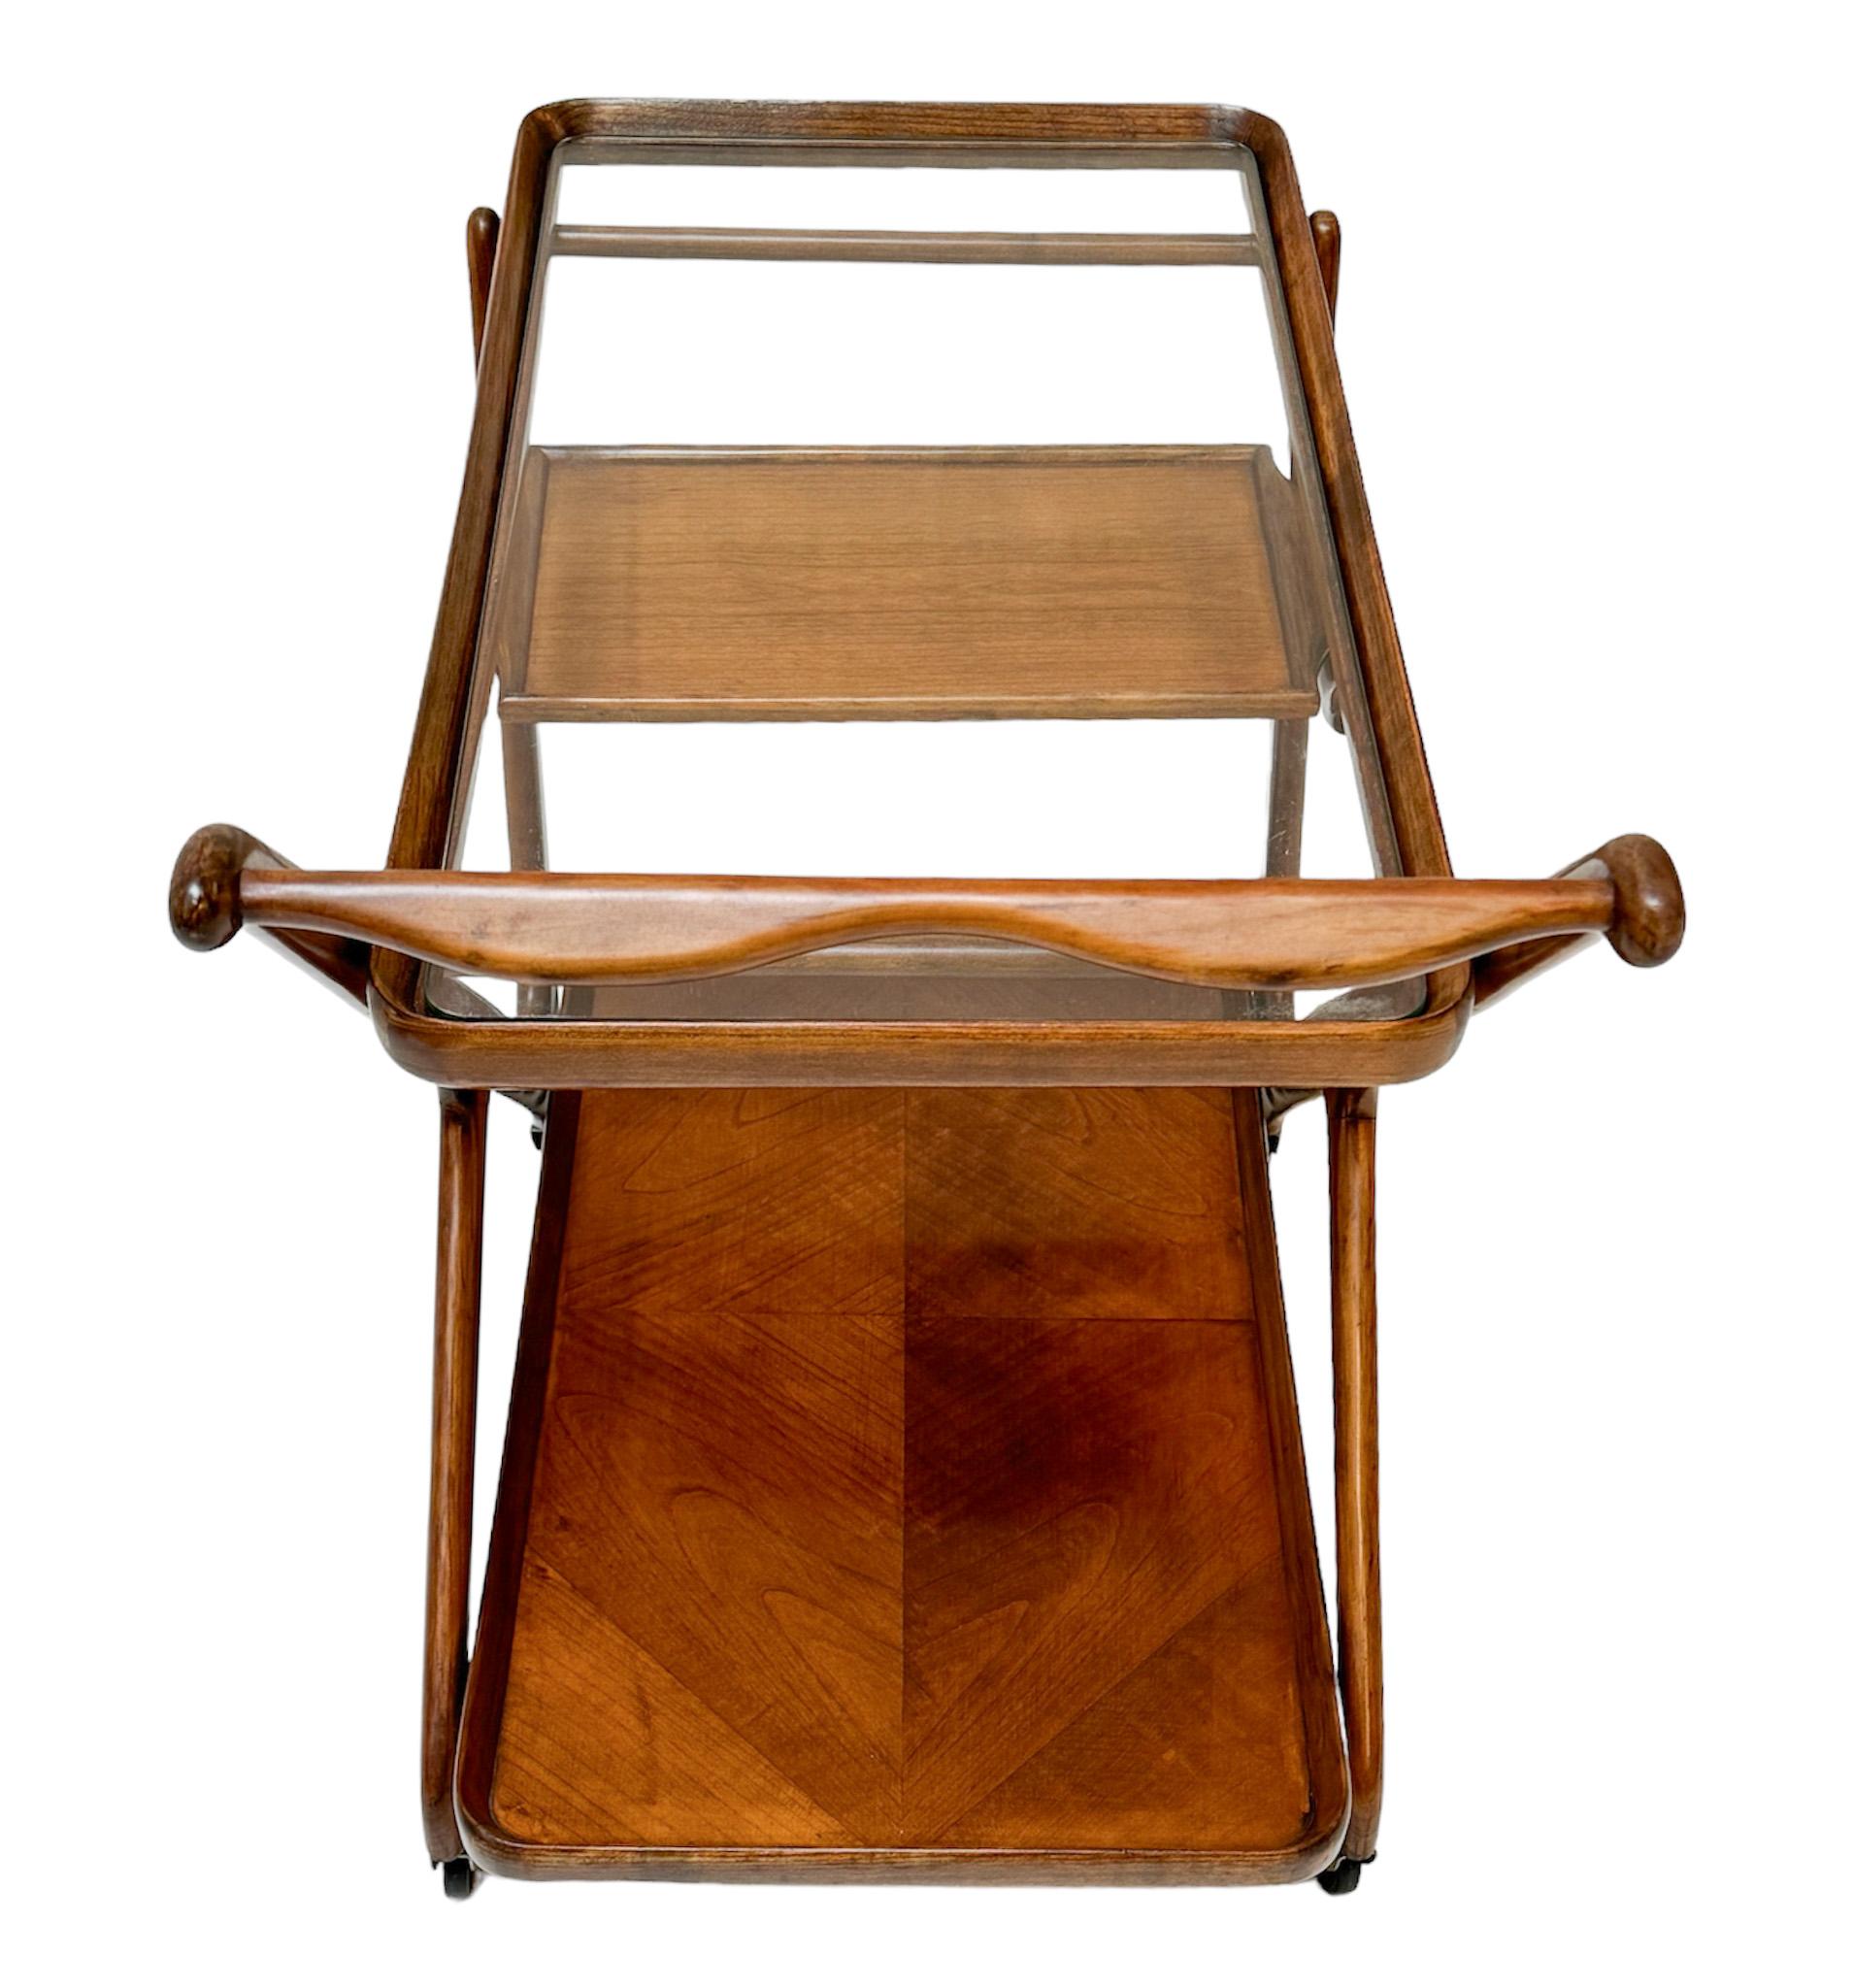 Walnut Mid-Century Modern Trolley or Bar Cart by Cesare Lacca for Cassina, 1950s For Sale 3